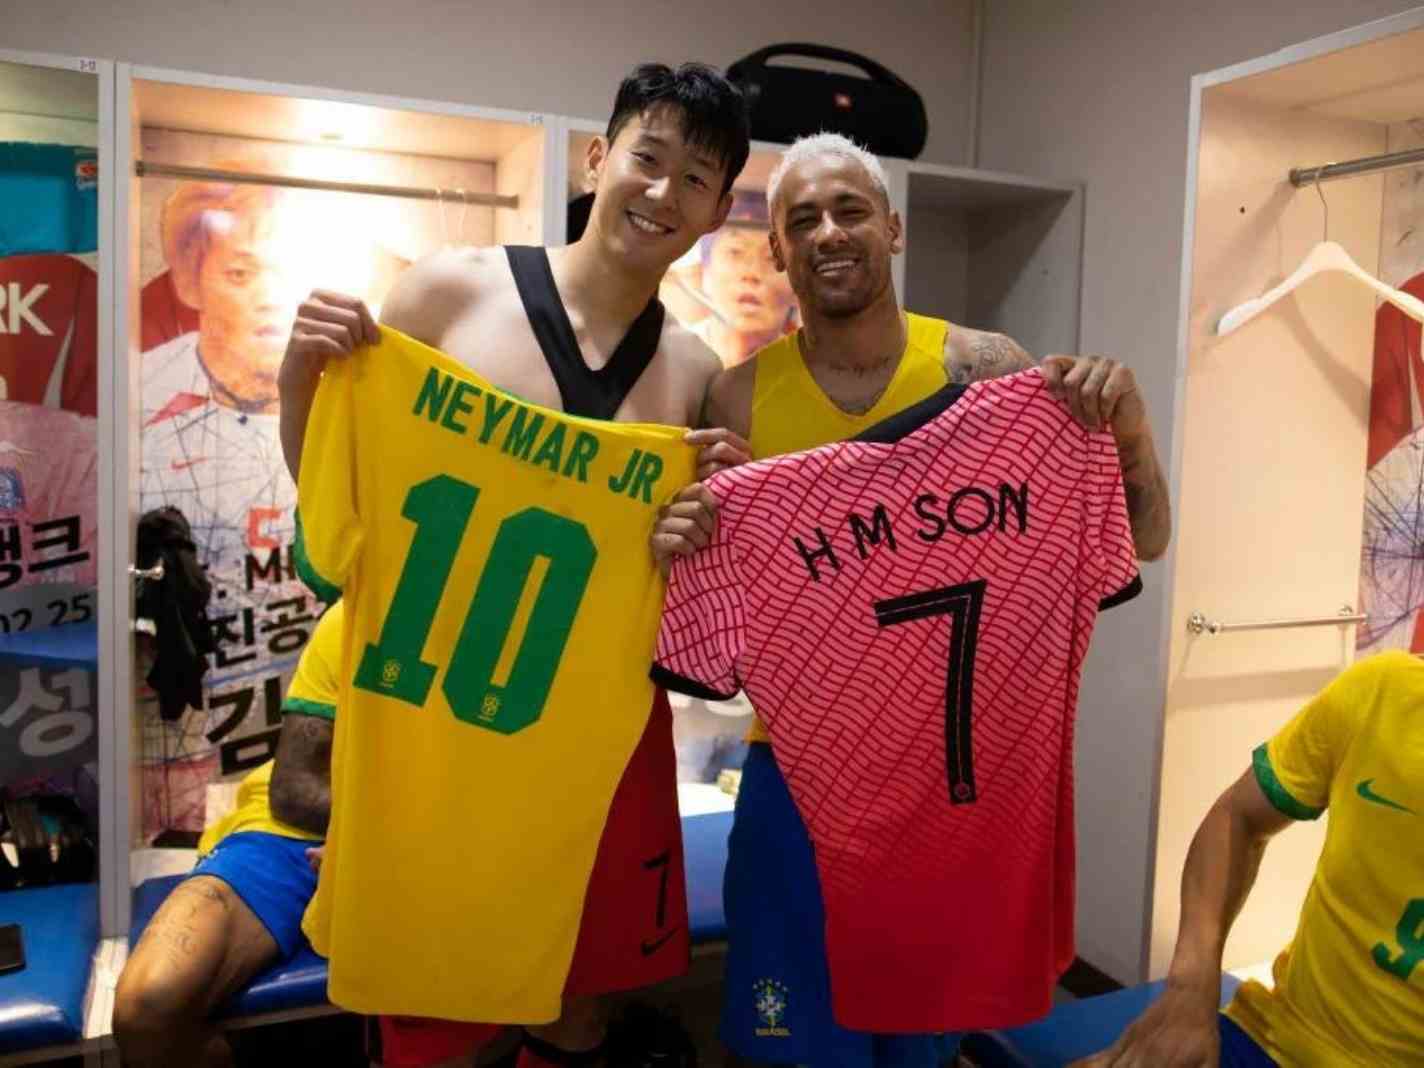 Son Heung-min and Neymar linked up and swapped shirts after Brazil v Korea friendly